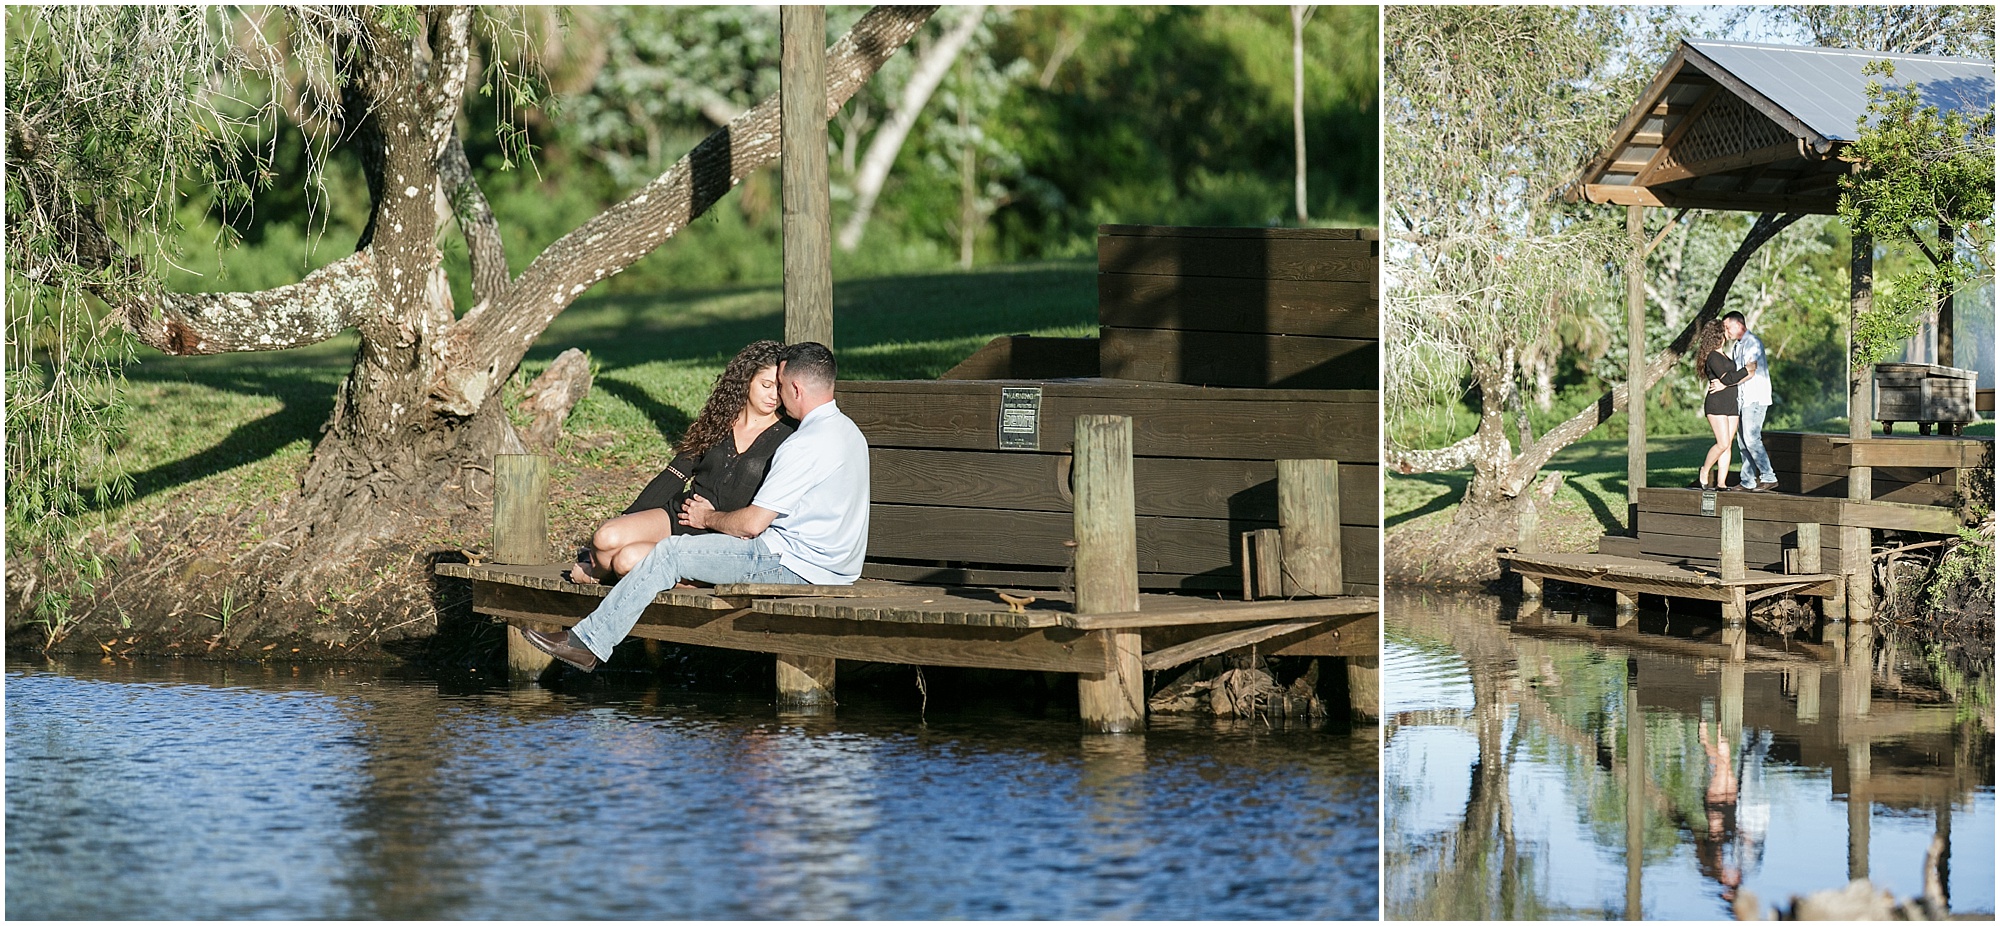 Engaged couple taking photos on a boat dock.